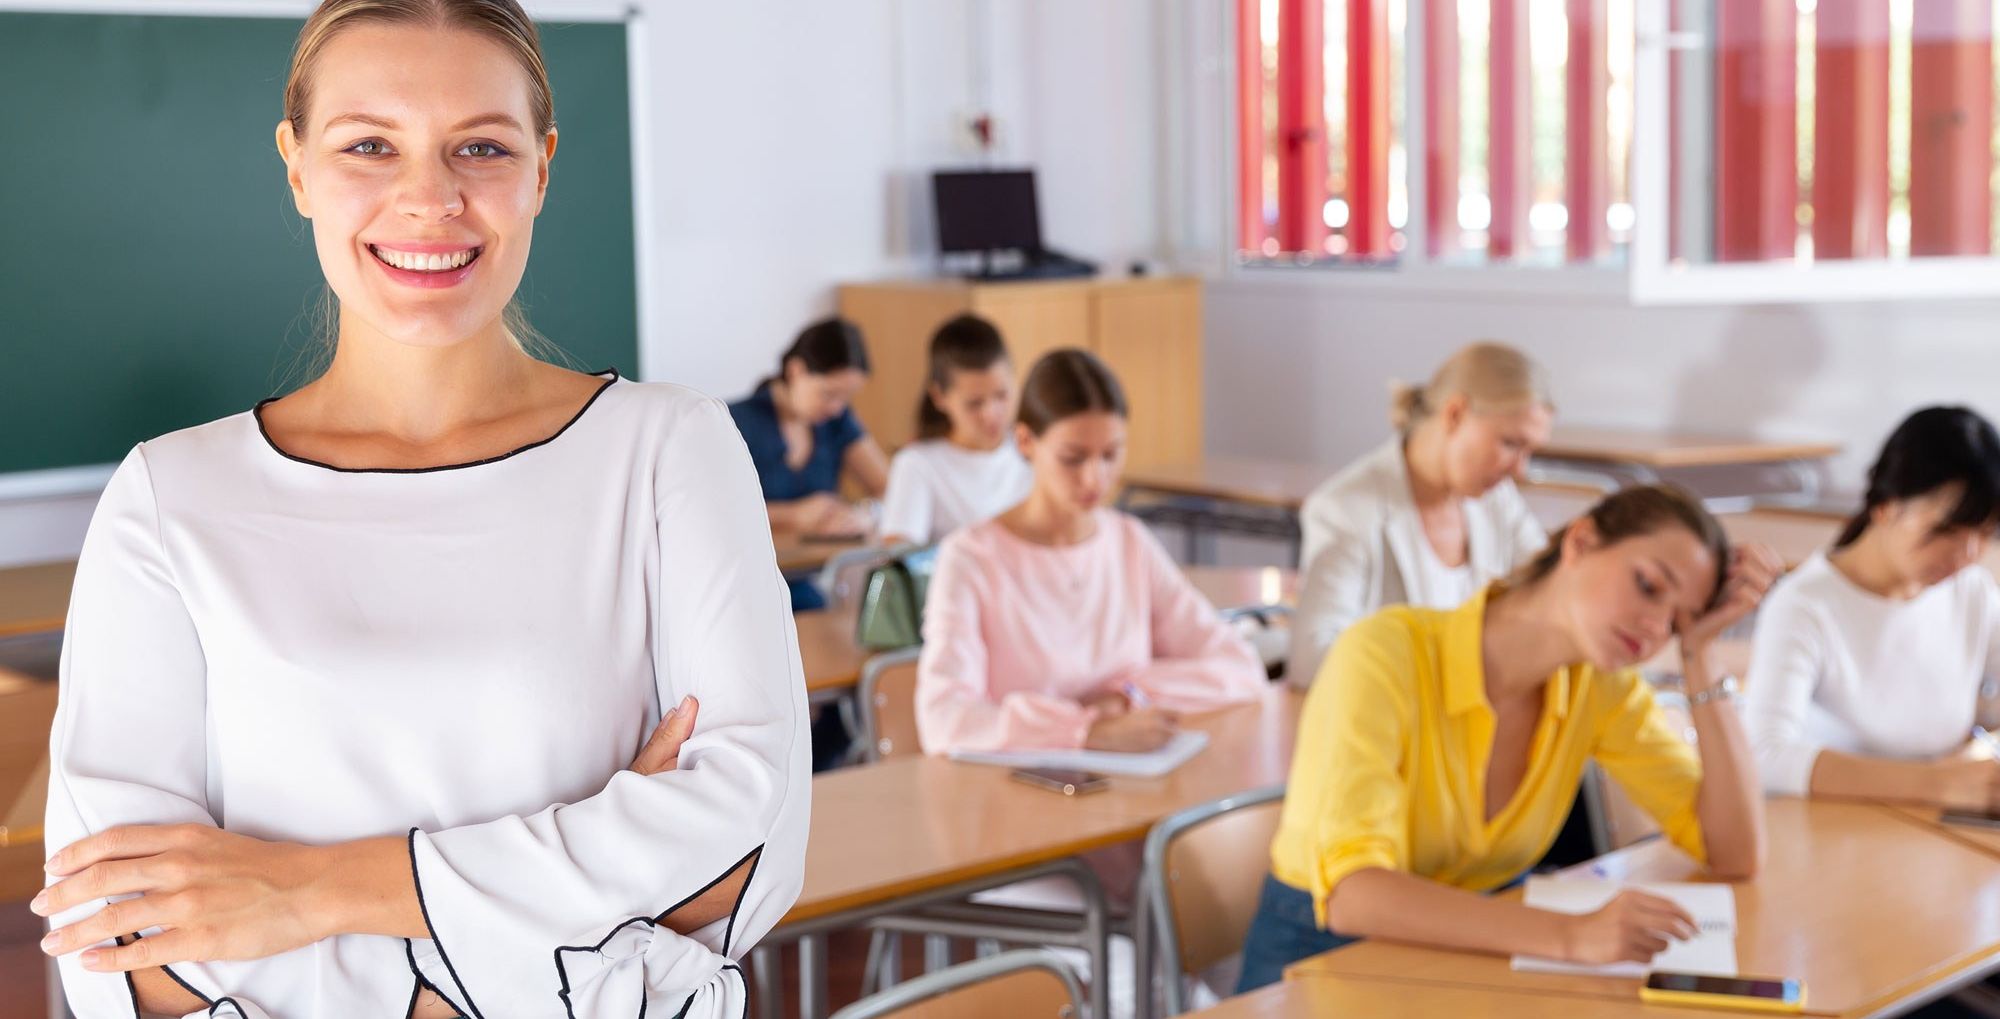 Female teacher smiling with students working at tables in background